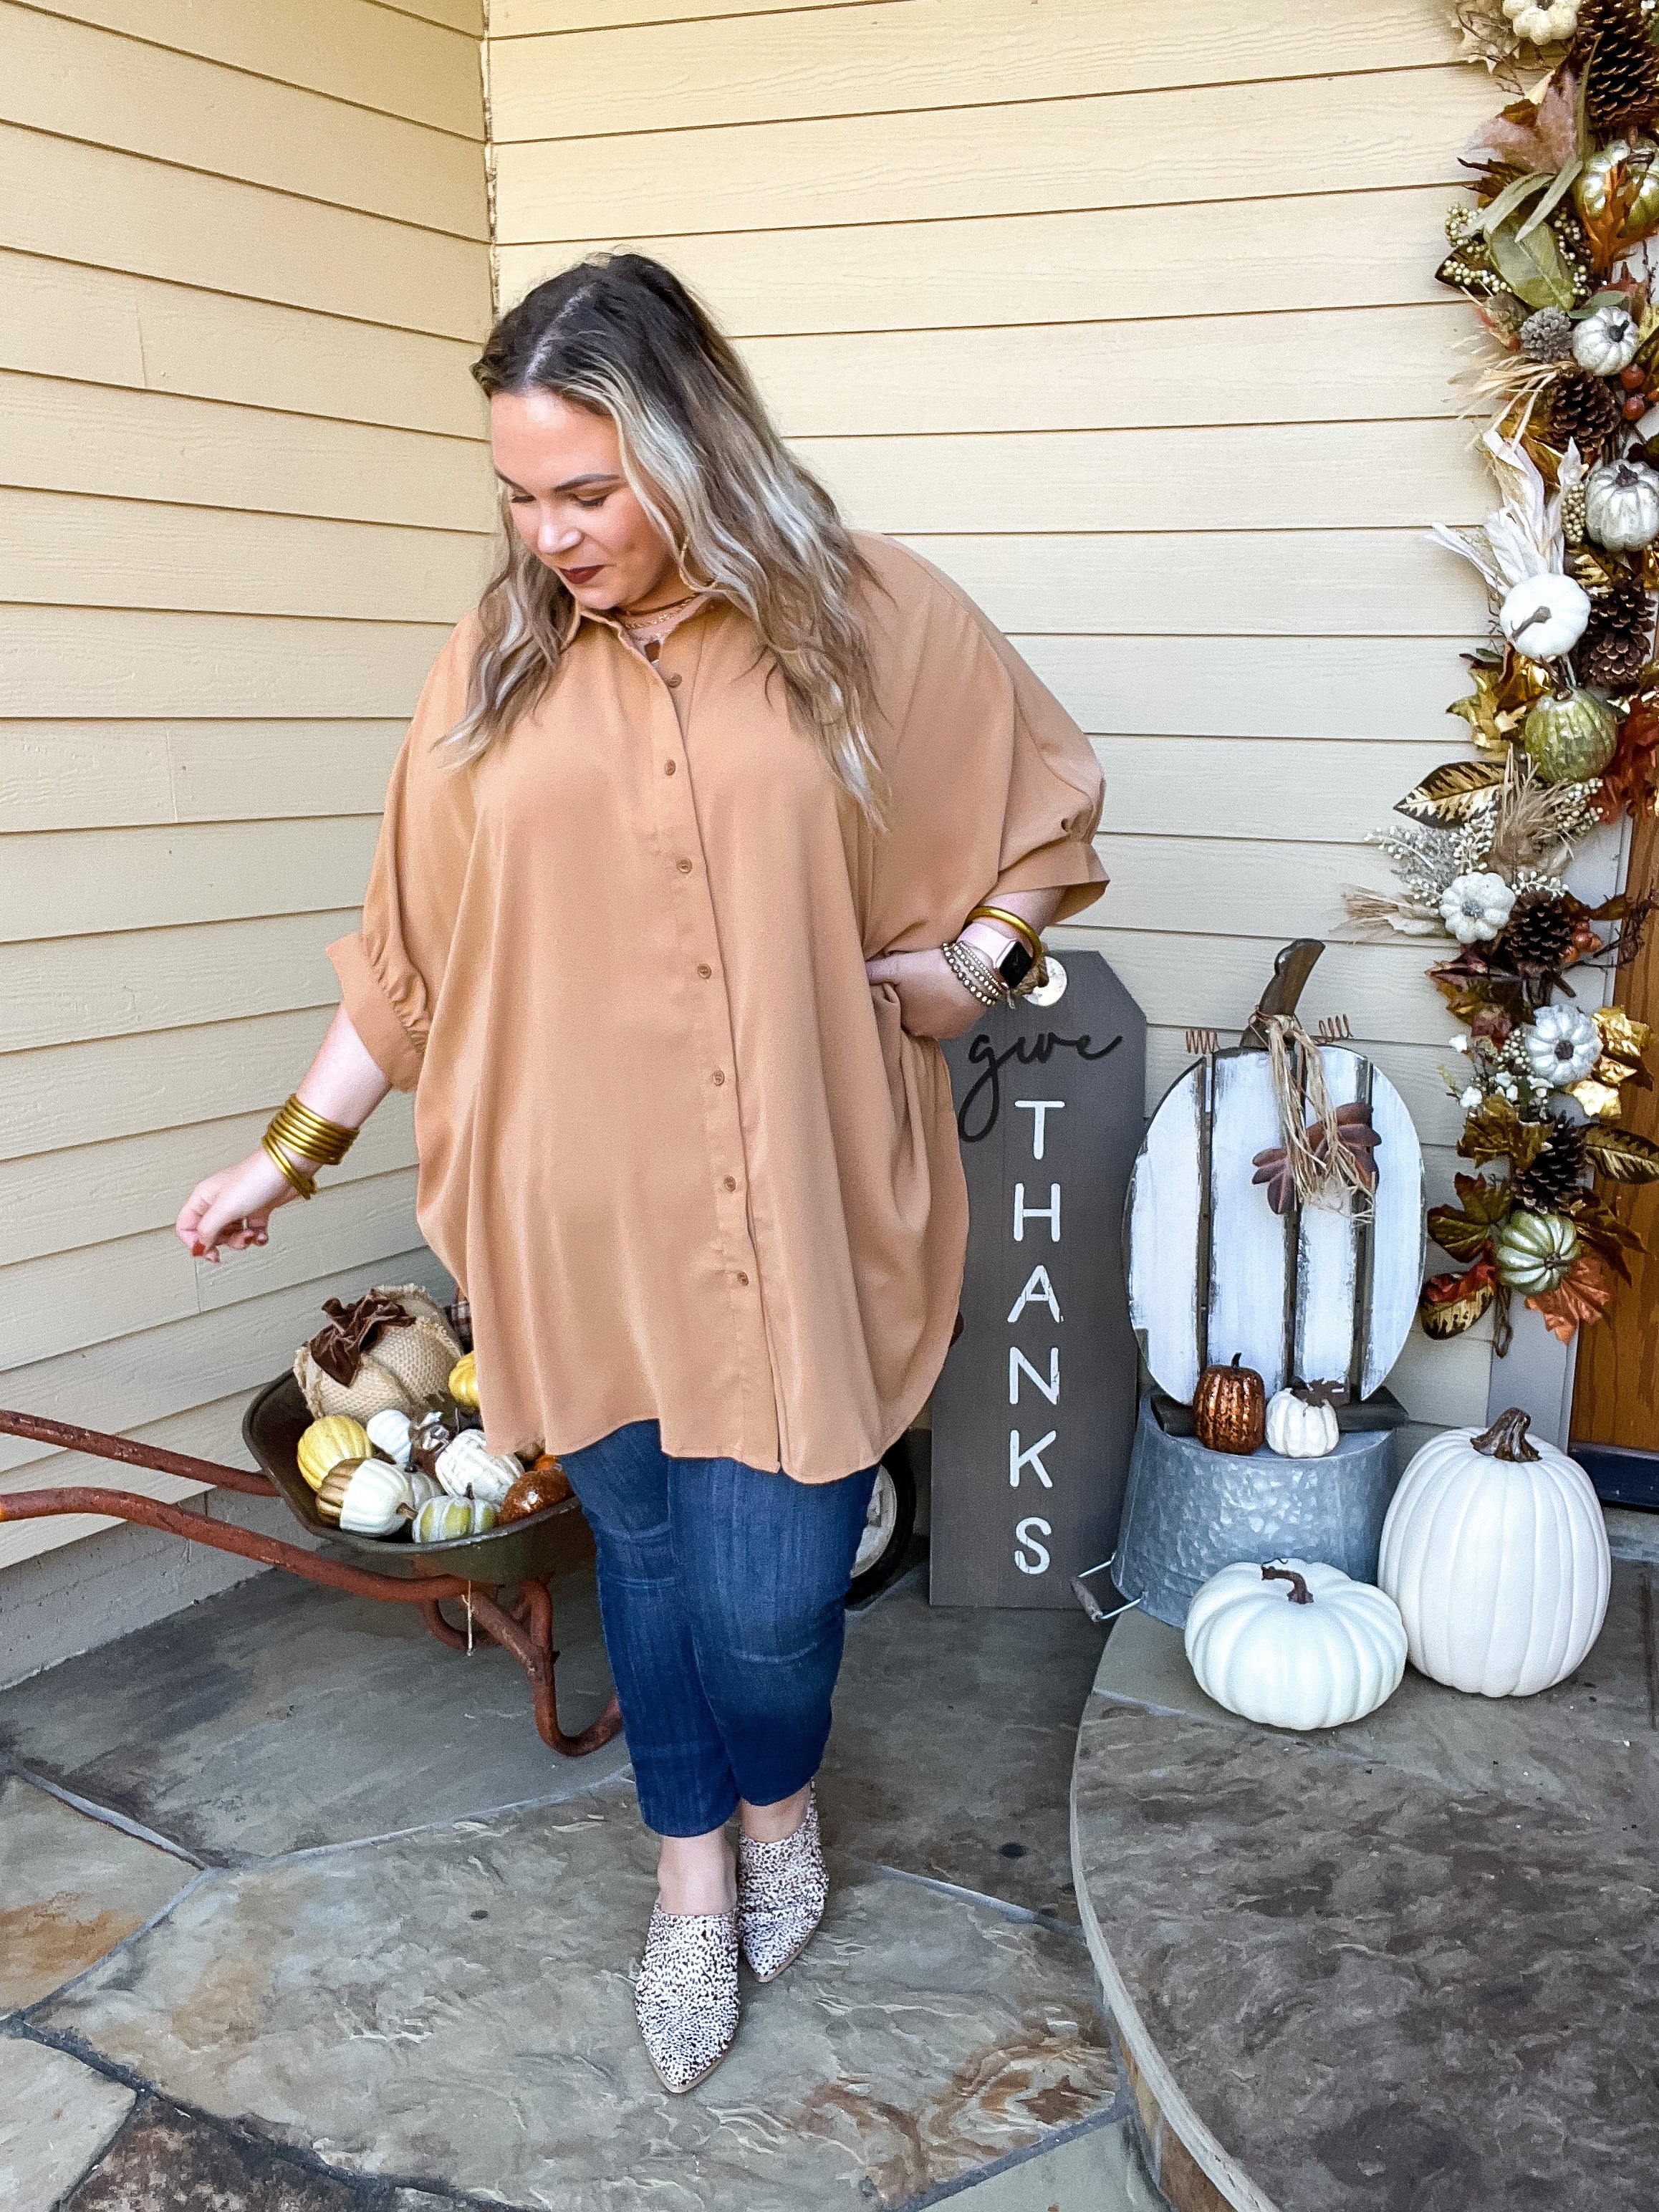 LAST CHANCE SMALL/MEDIUM | City Lifestyle Button Up Half Sleeve Poncho Top in Camel Brown - Giddy Up Glamour Boutique